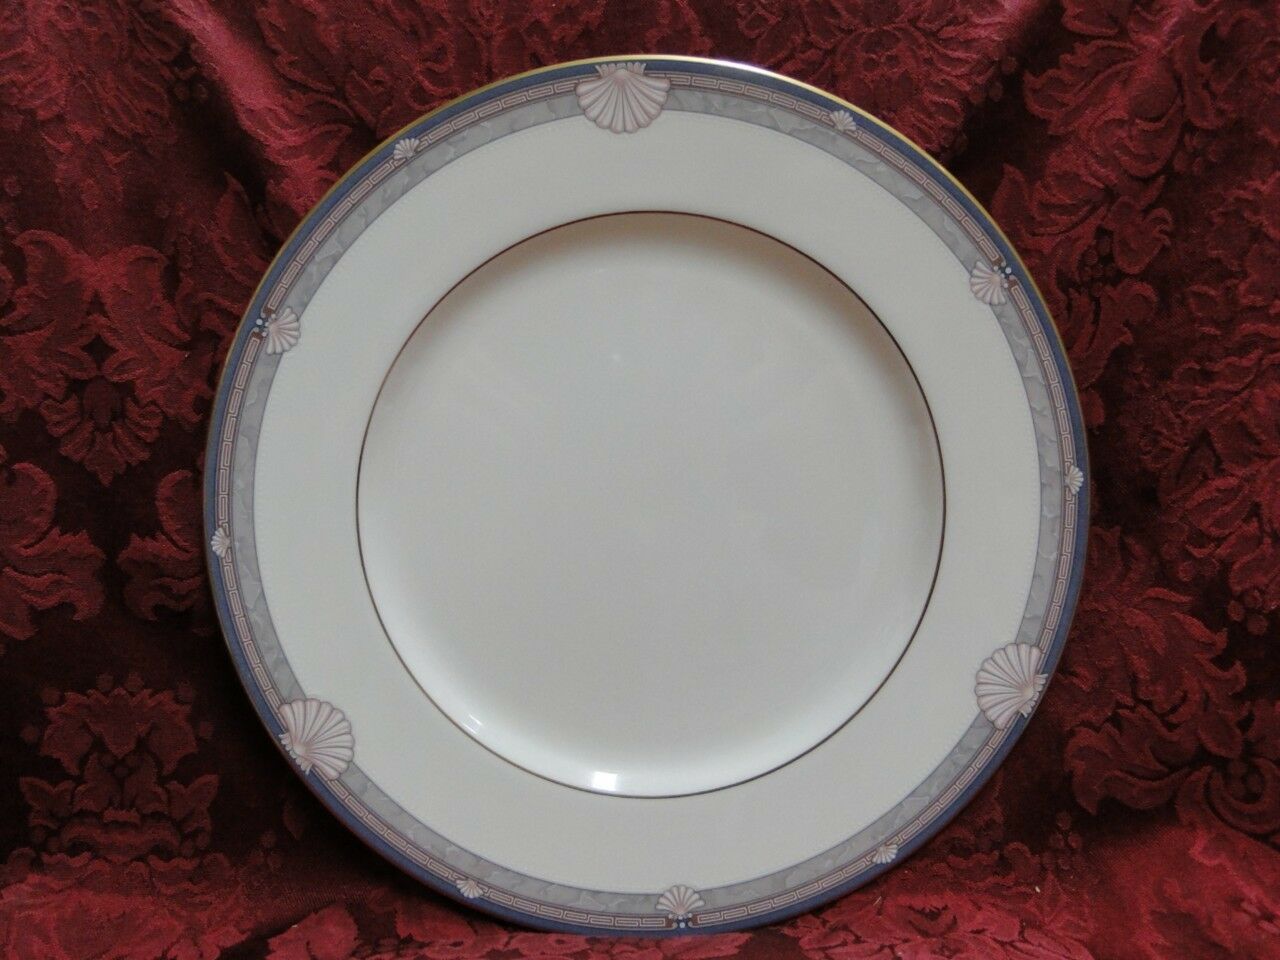 Noritake Stanford Court, 9748, Shells, Gray/Tan Marble: Bread Plate (s), 6 1/2"